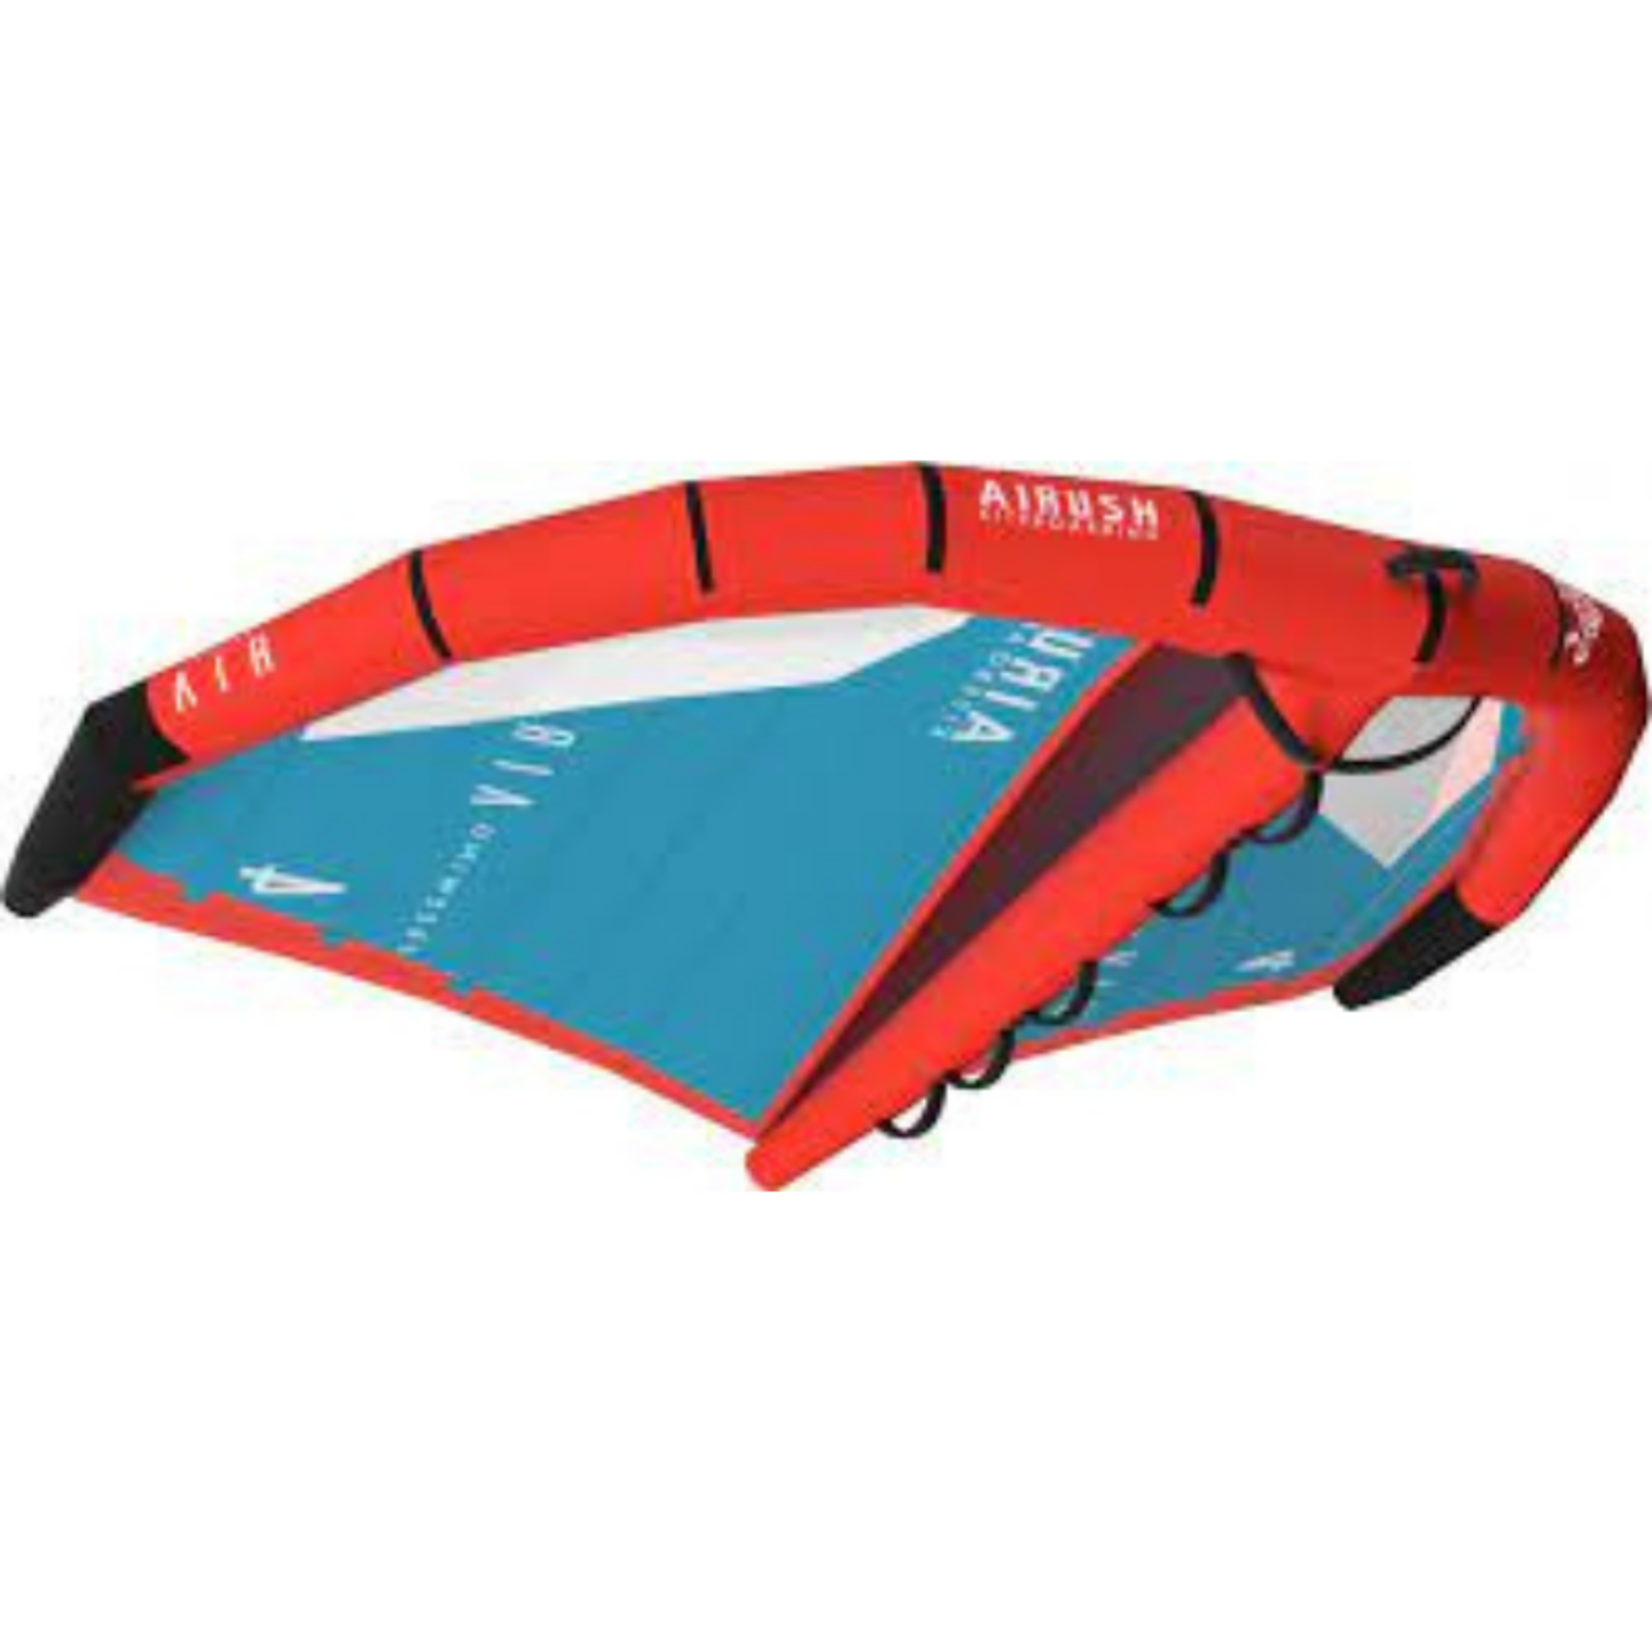 Freewing Wing - FREEWING AIR 5M Teal and Red